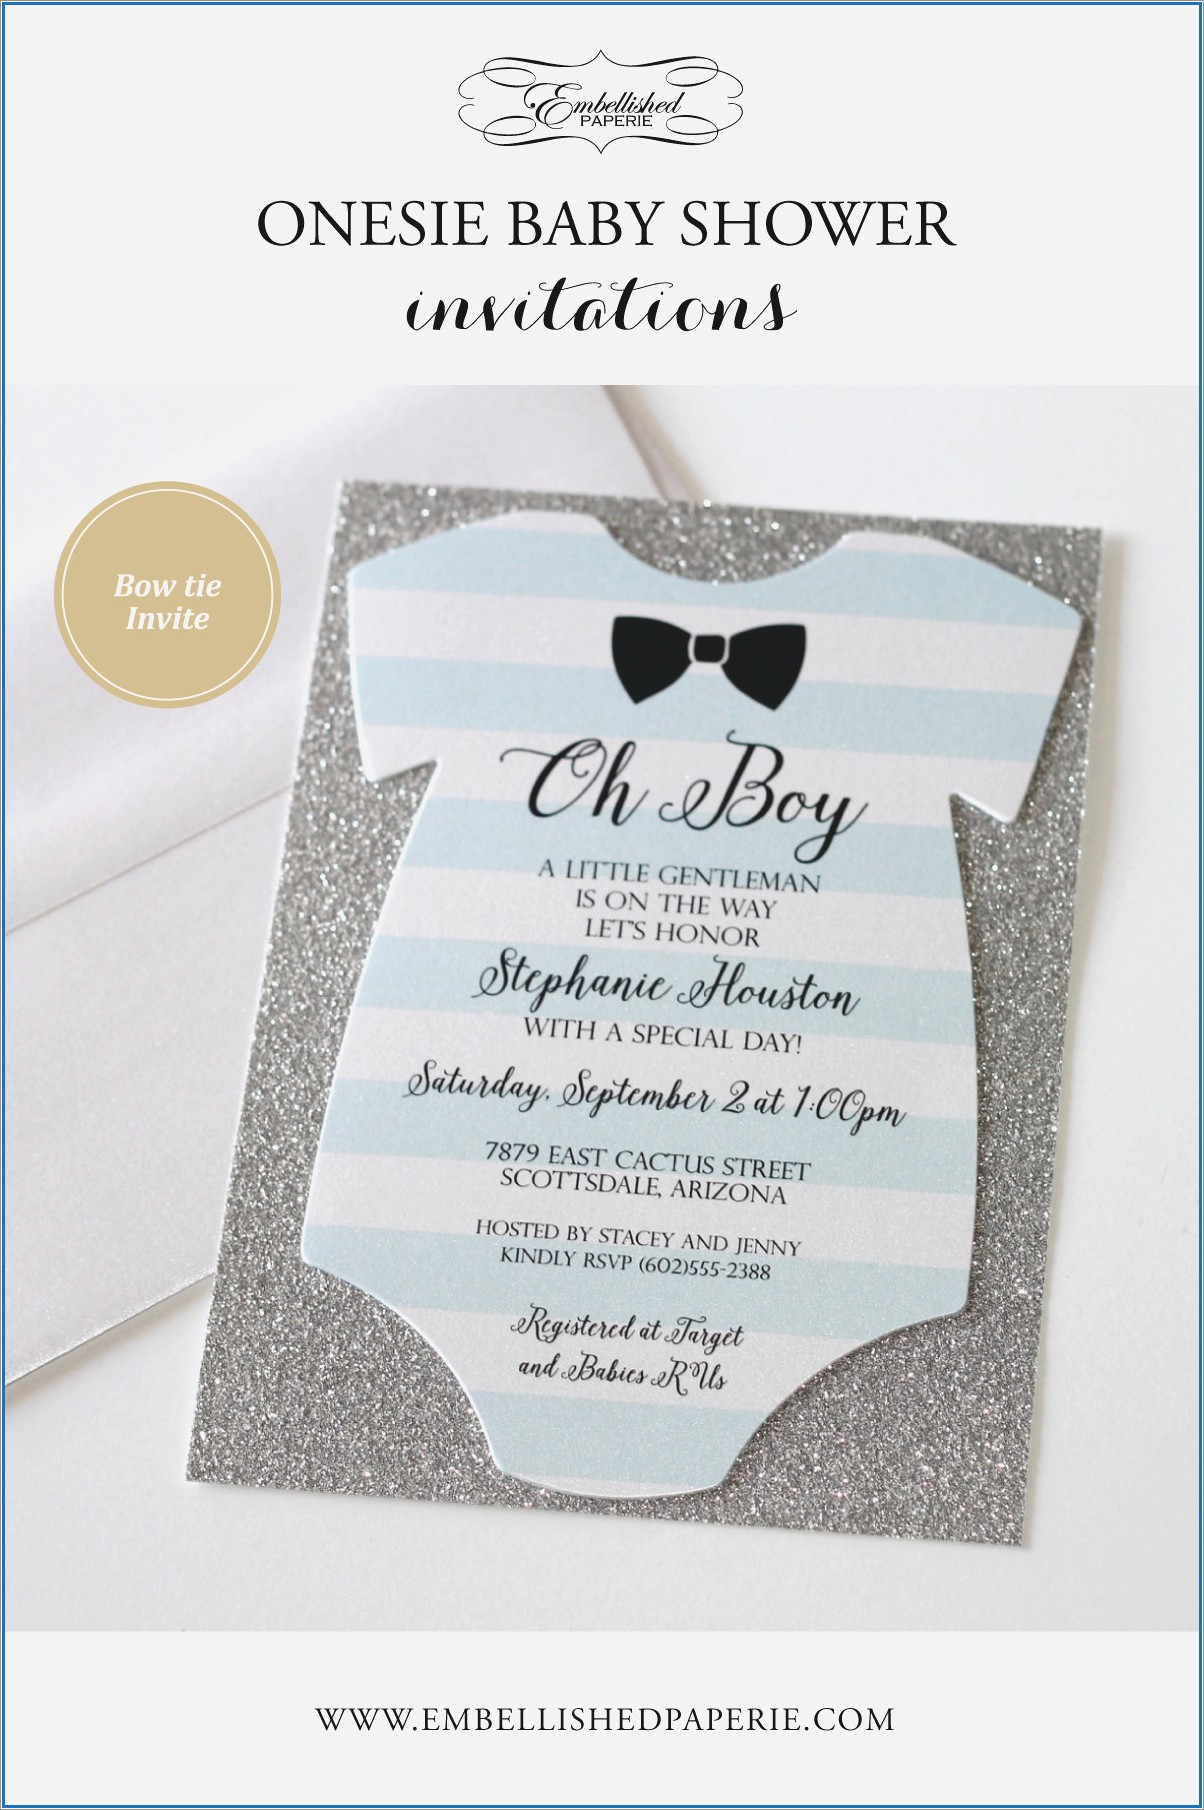 Onesie Invitation Cut Out